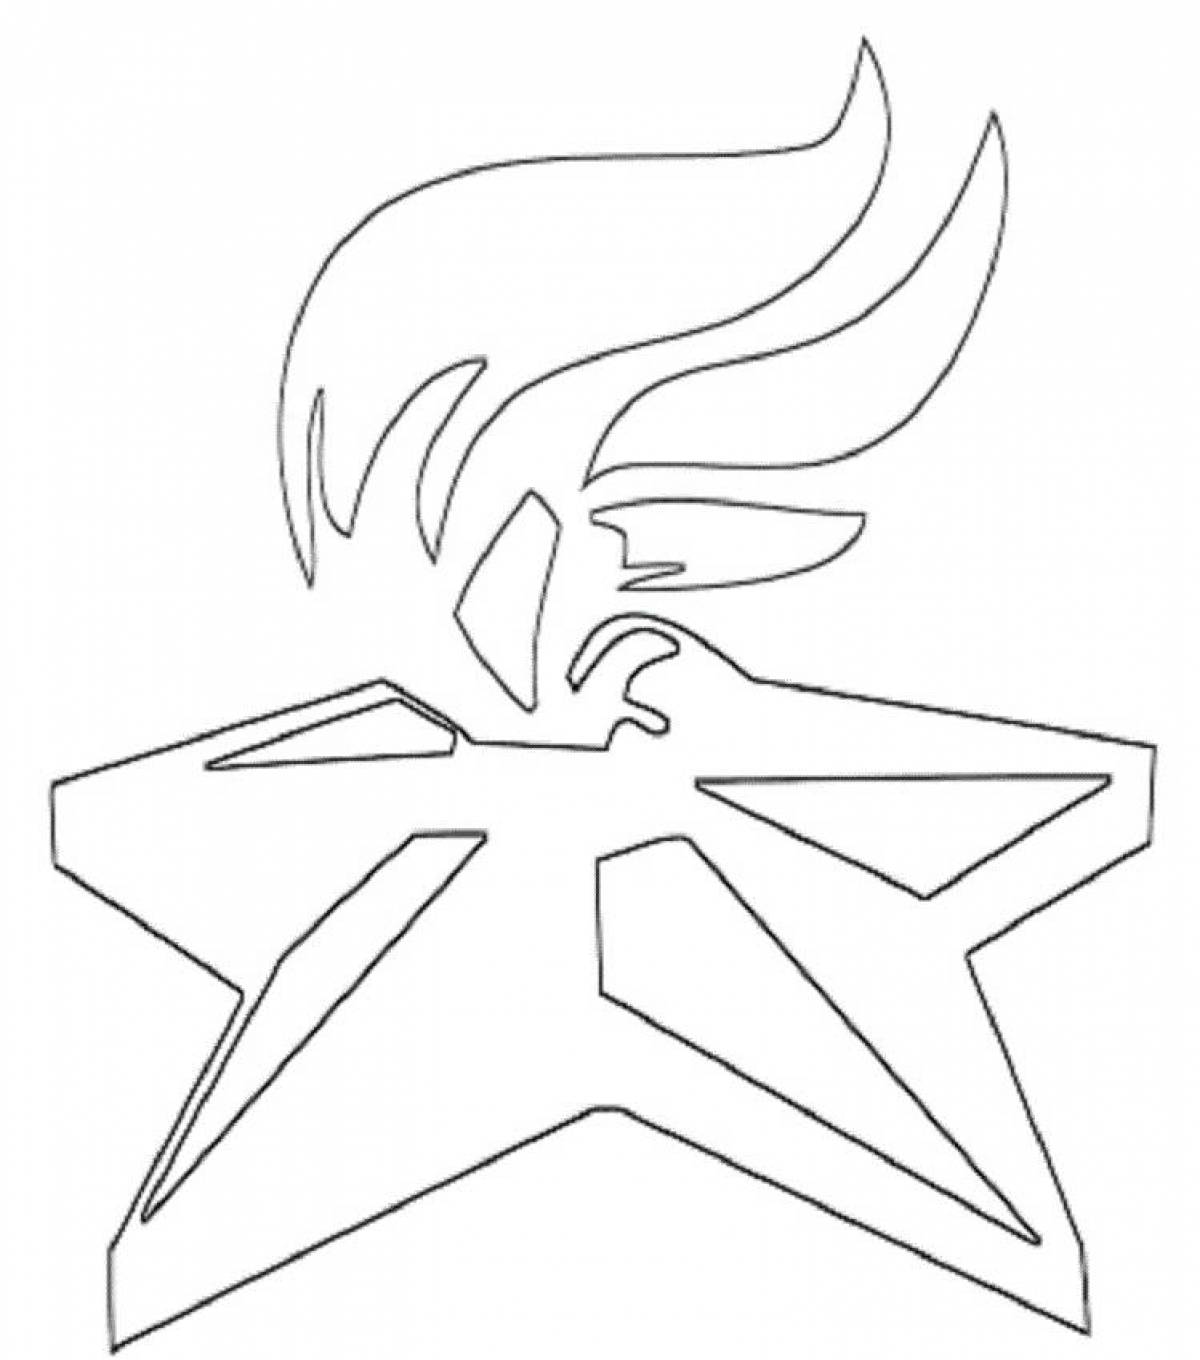 Lovingly illustrated eternal flame coloring page for kids